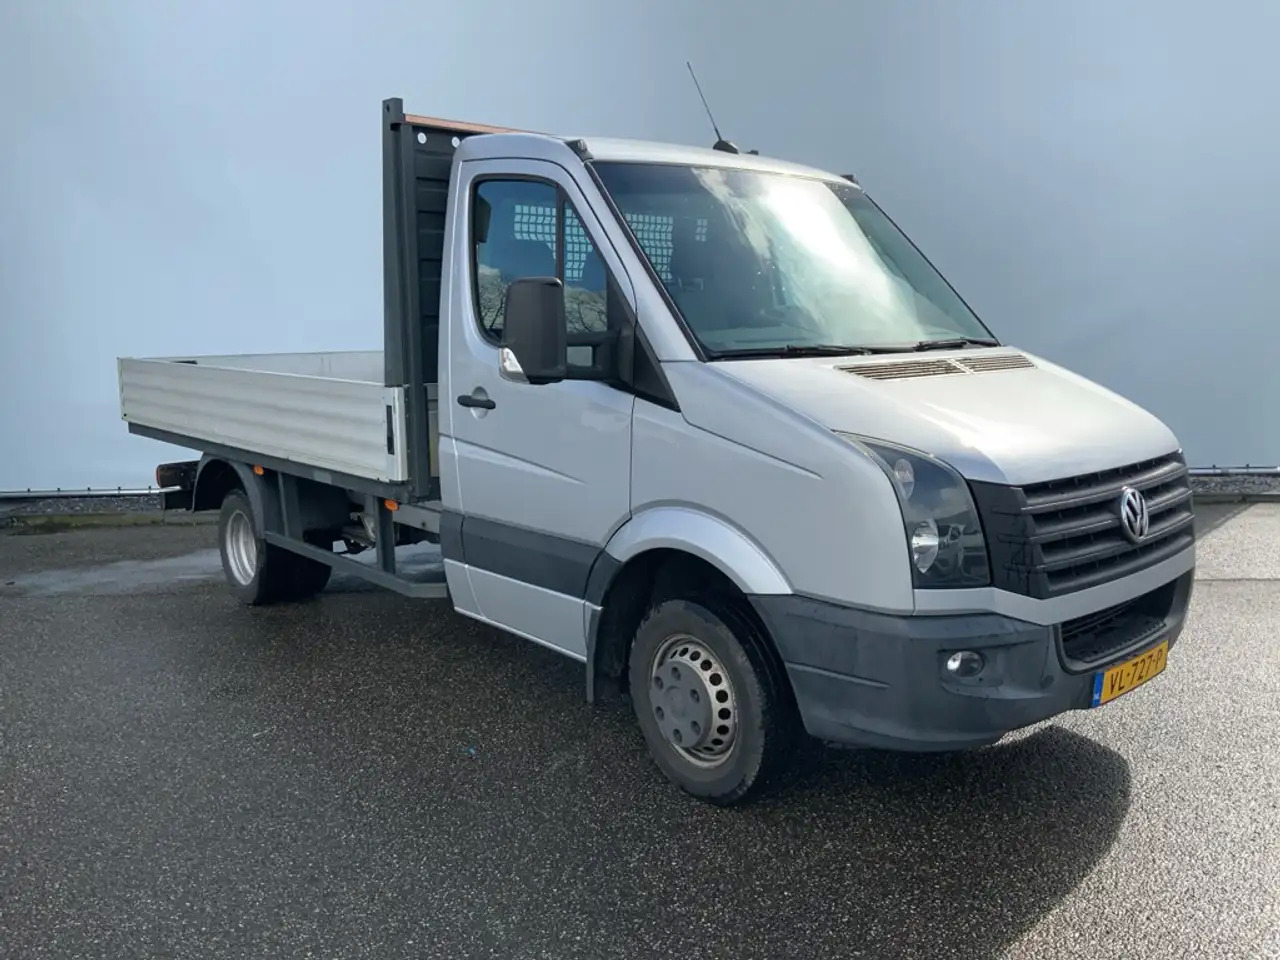 Leasing Volkswagen Crafter 46 2.0 TDI L2H1 Pick Up Airco Navi Cruise 3 Zits E Volkswagen Crafter 46 2.0 TDI L2H1 Pick Up Airco Navi Cruise 3 Zits E: gambar 2